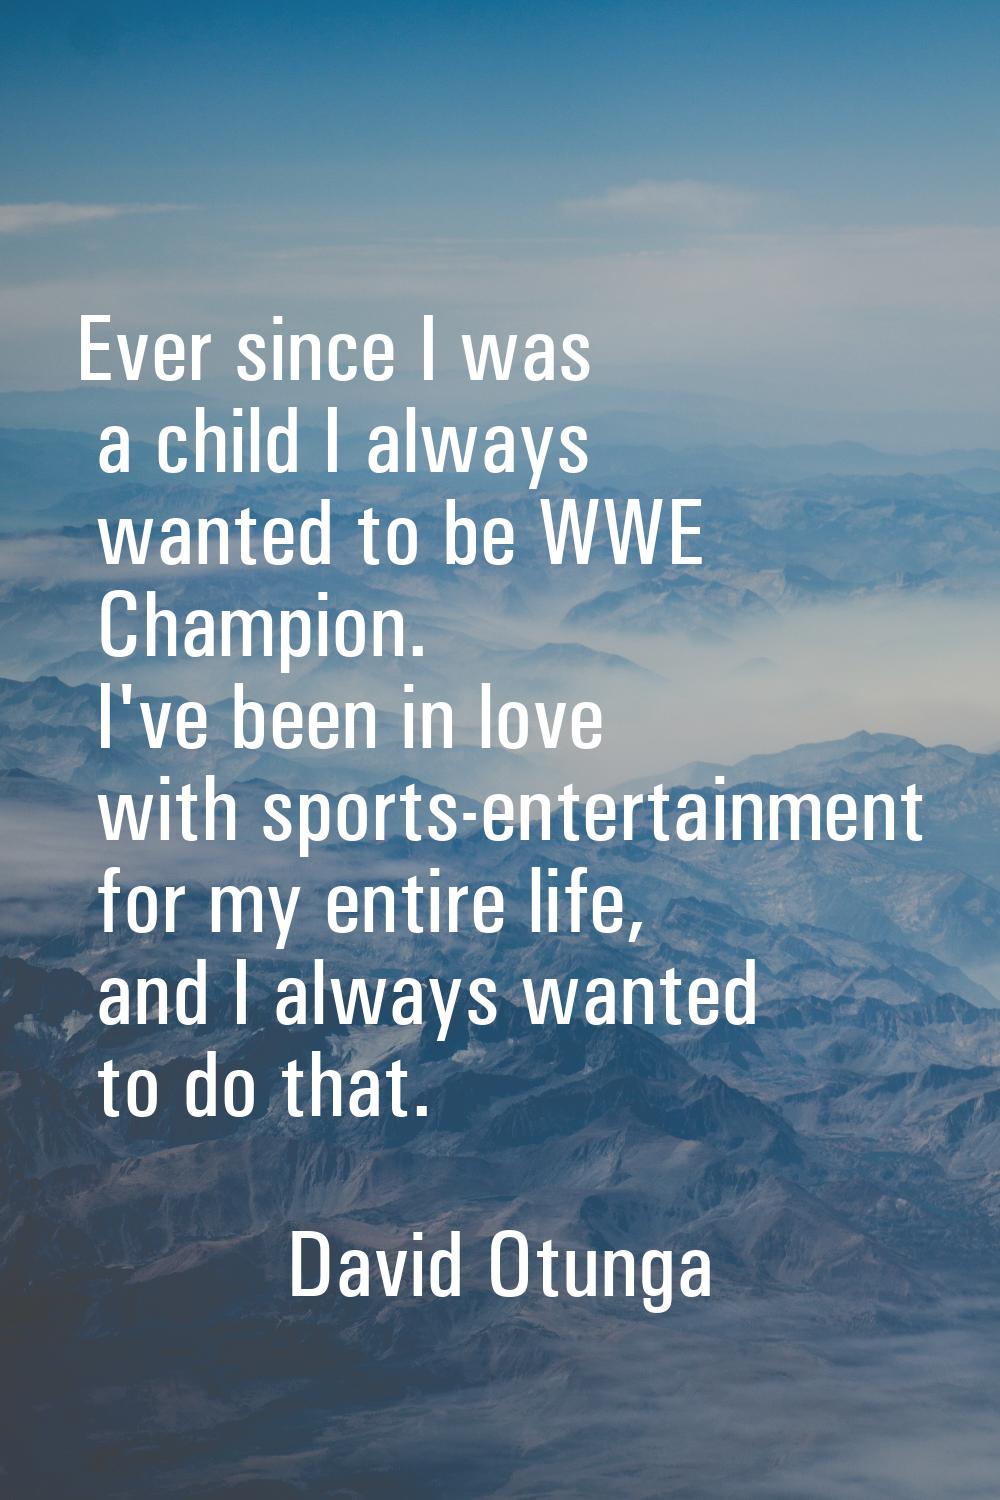 Ever since I was a child I always wanted to be WWE Champion. I've been in love with sports-entertai